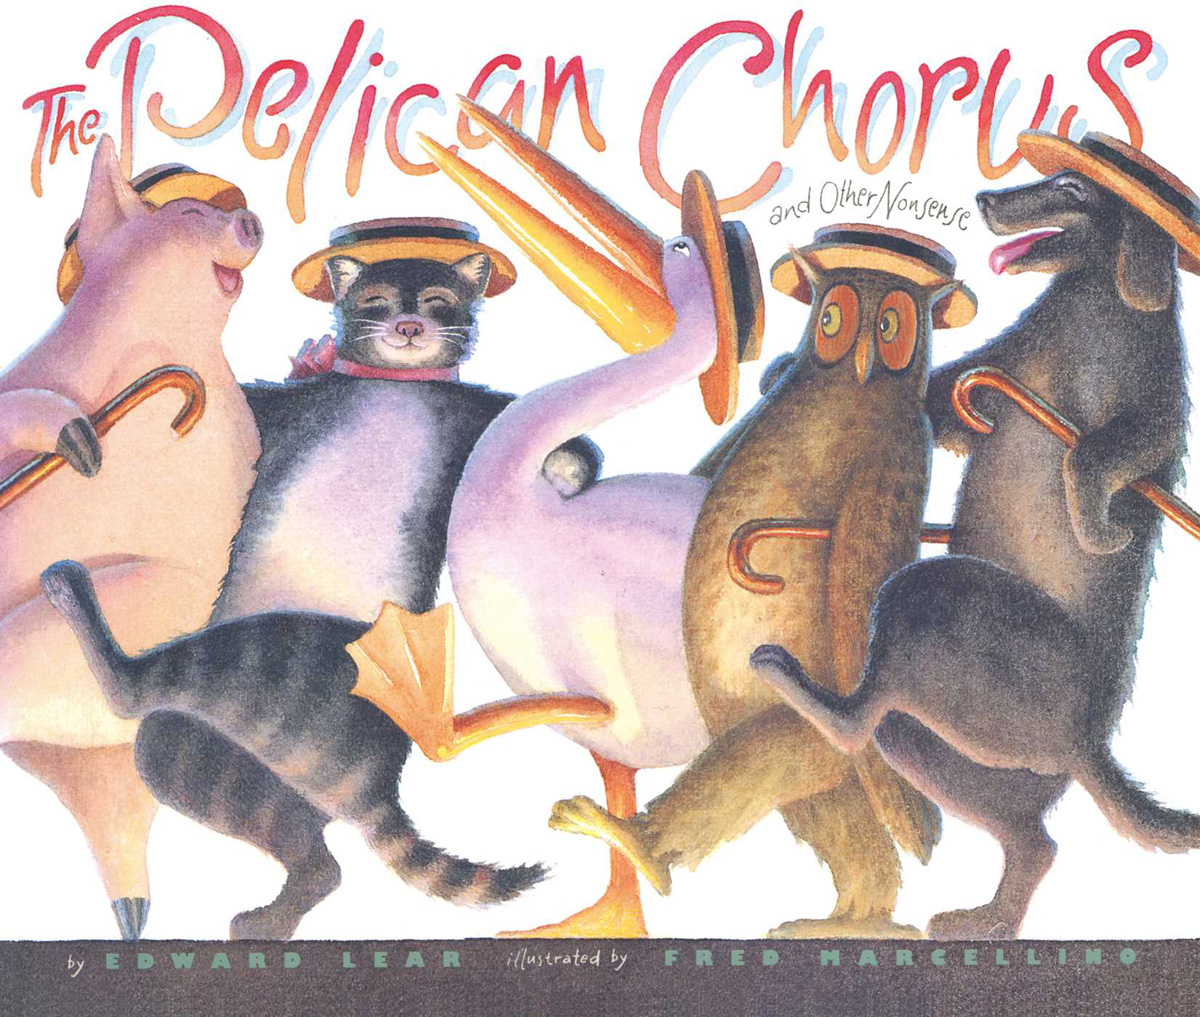 Cover of “The Pelican Chorus and Other Nonsense”